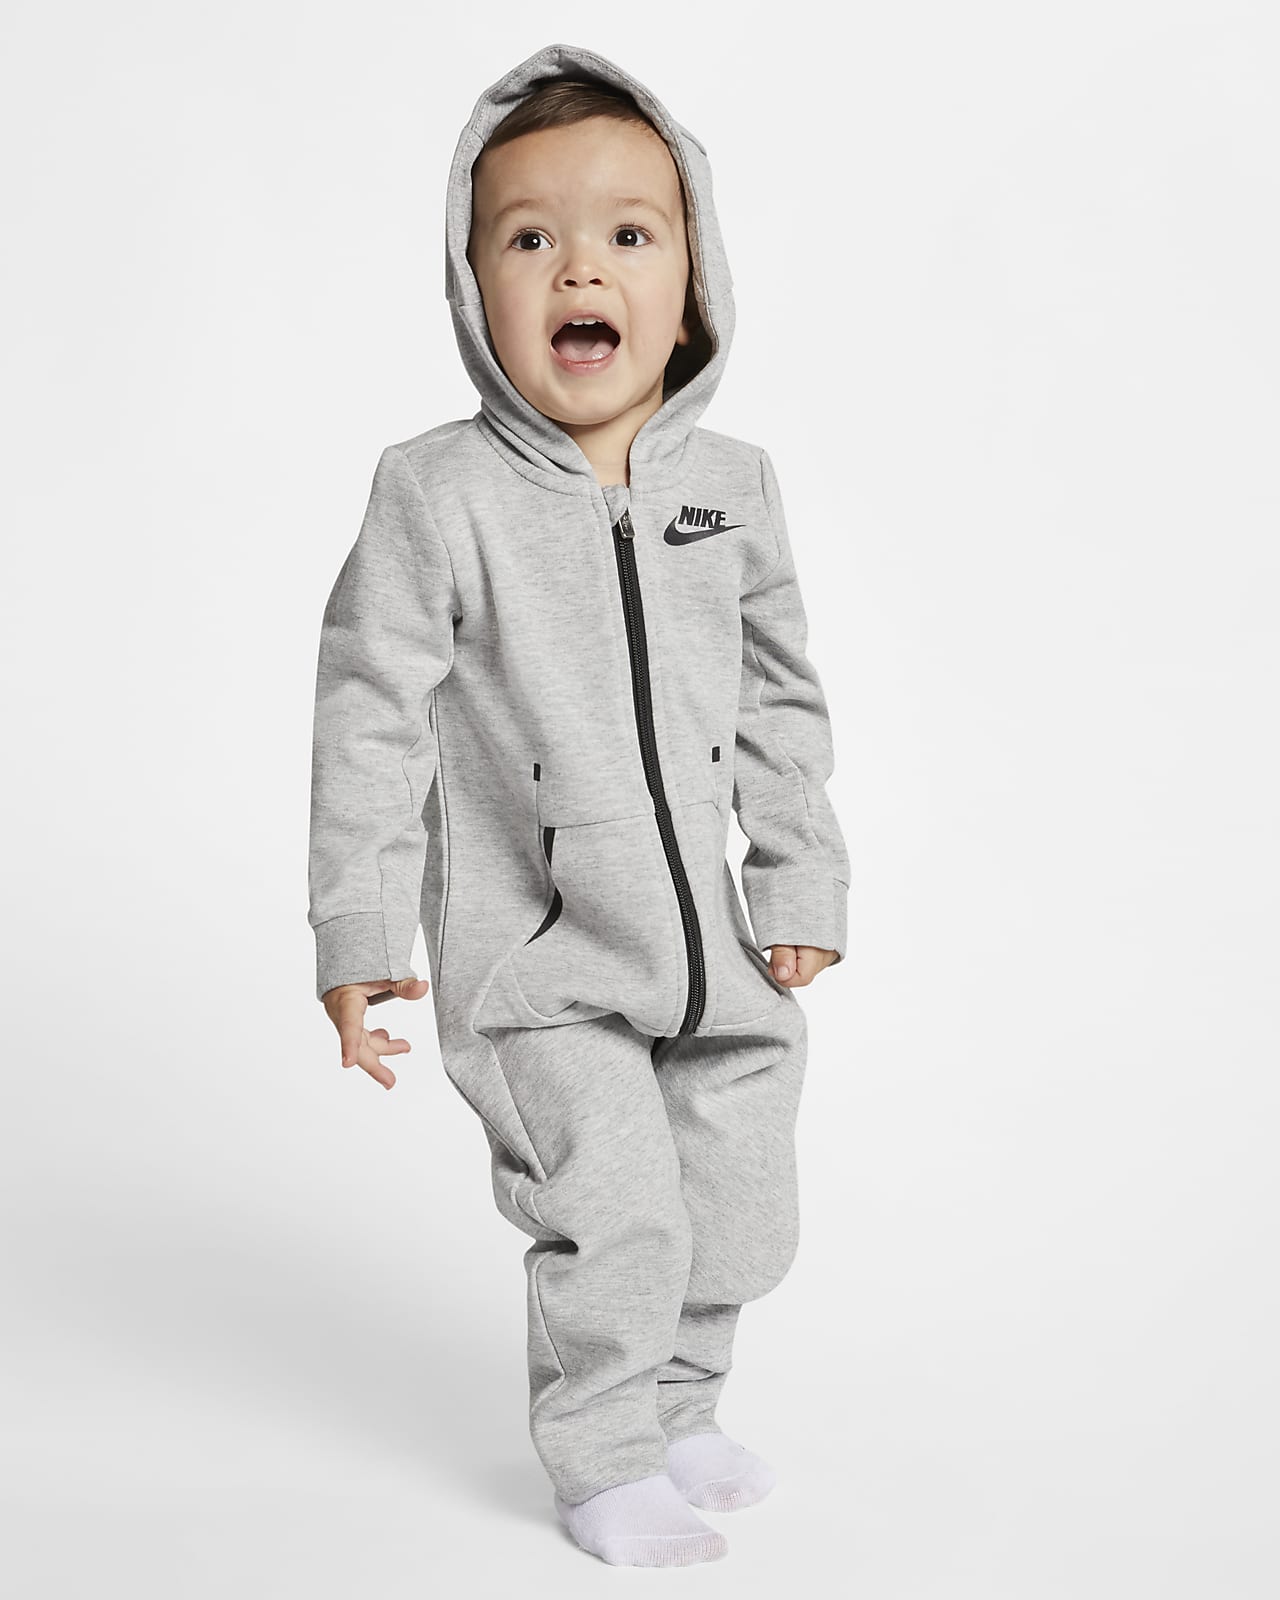 infant nike coverall